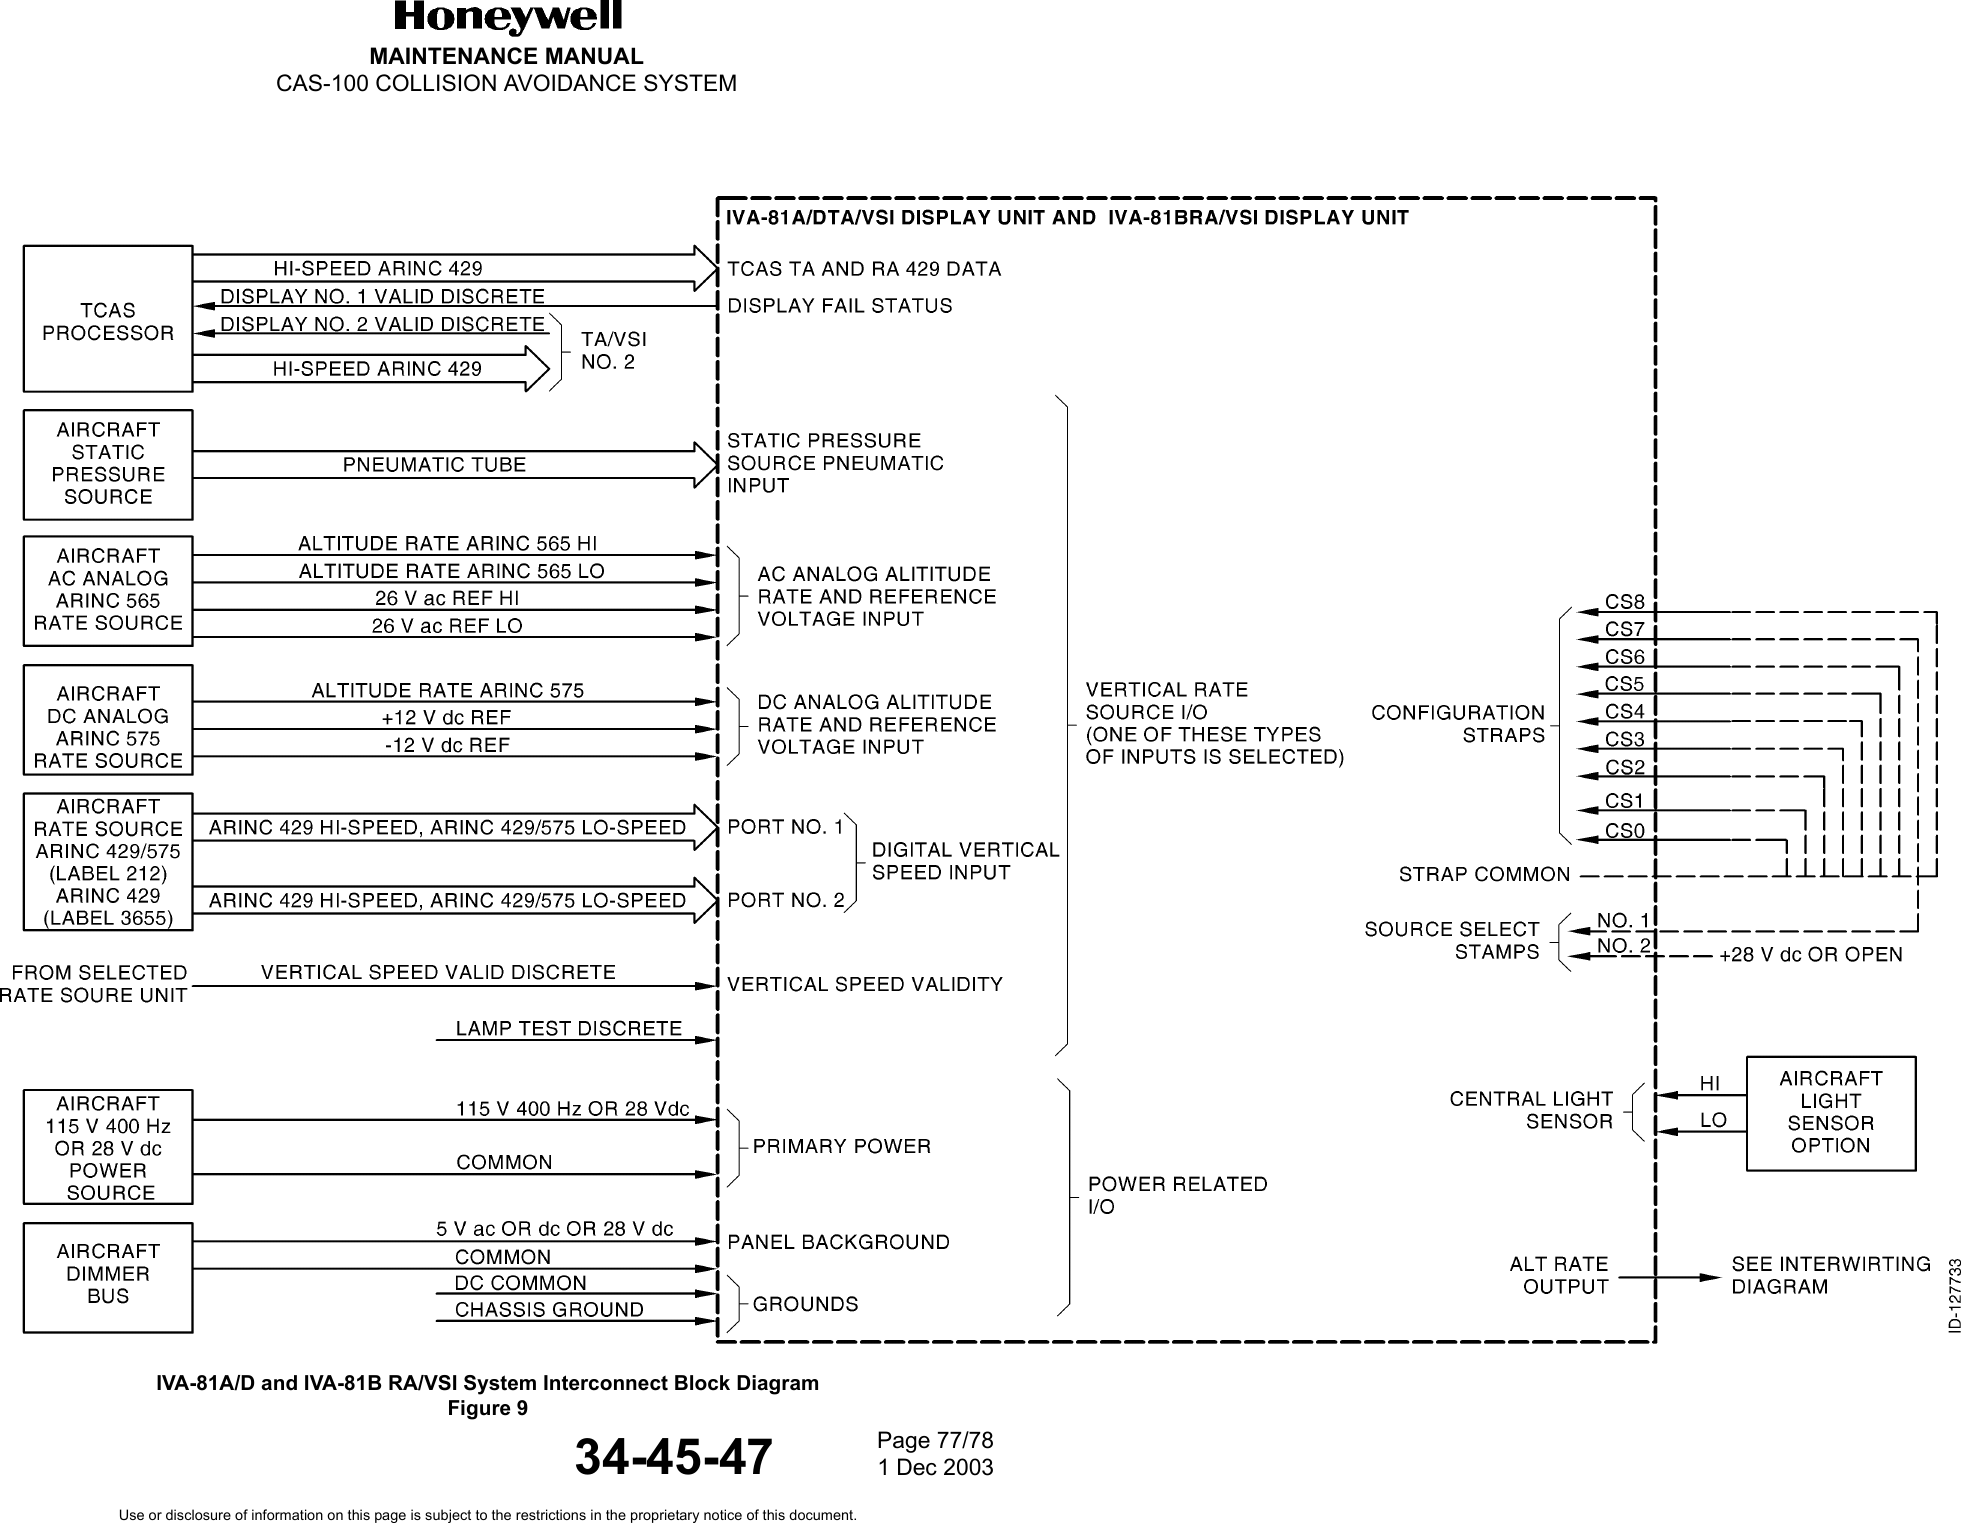 MAINTENANCE MANUALCAS-100 COLLISION AVOIDANCE SYSTEM34-45-47IVA-81A/D and IVA-81B RA/VSI System Interconnect Block DiagramFigure 9Page 77/781 Dec 2003Use or disclosure of information on this page is subject to the restrictions in the proprietary notice of this document.